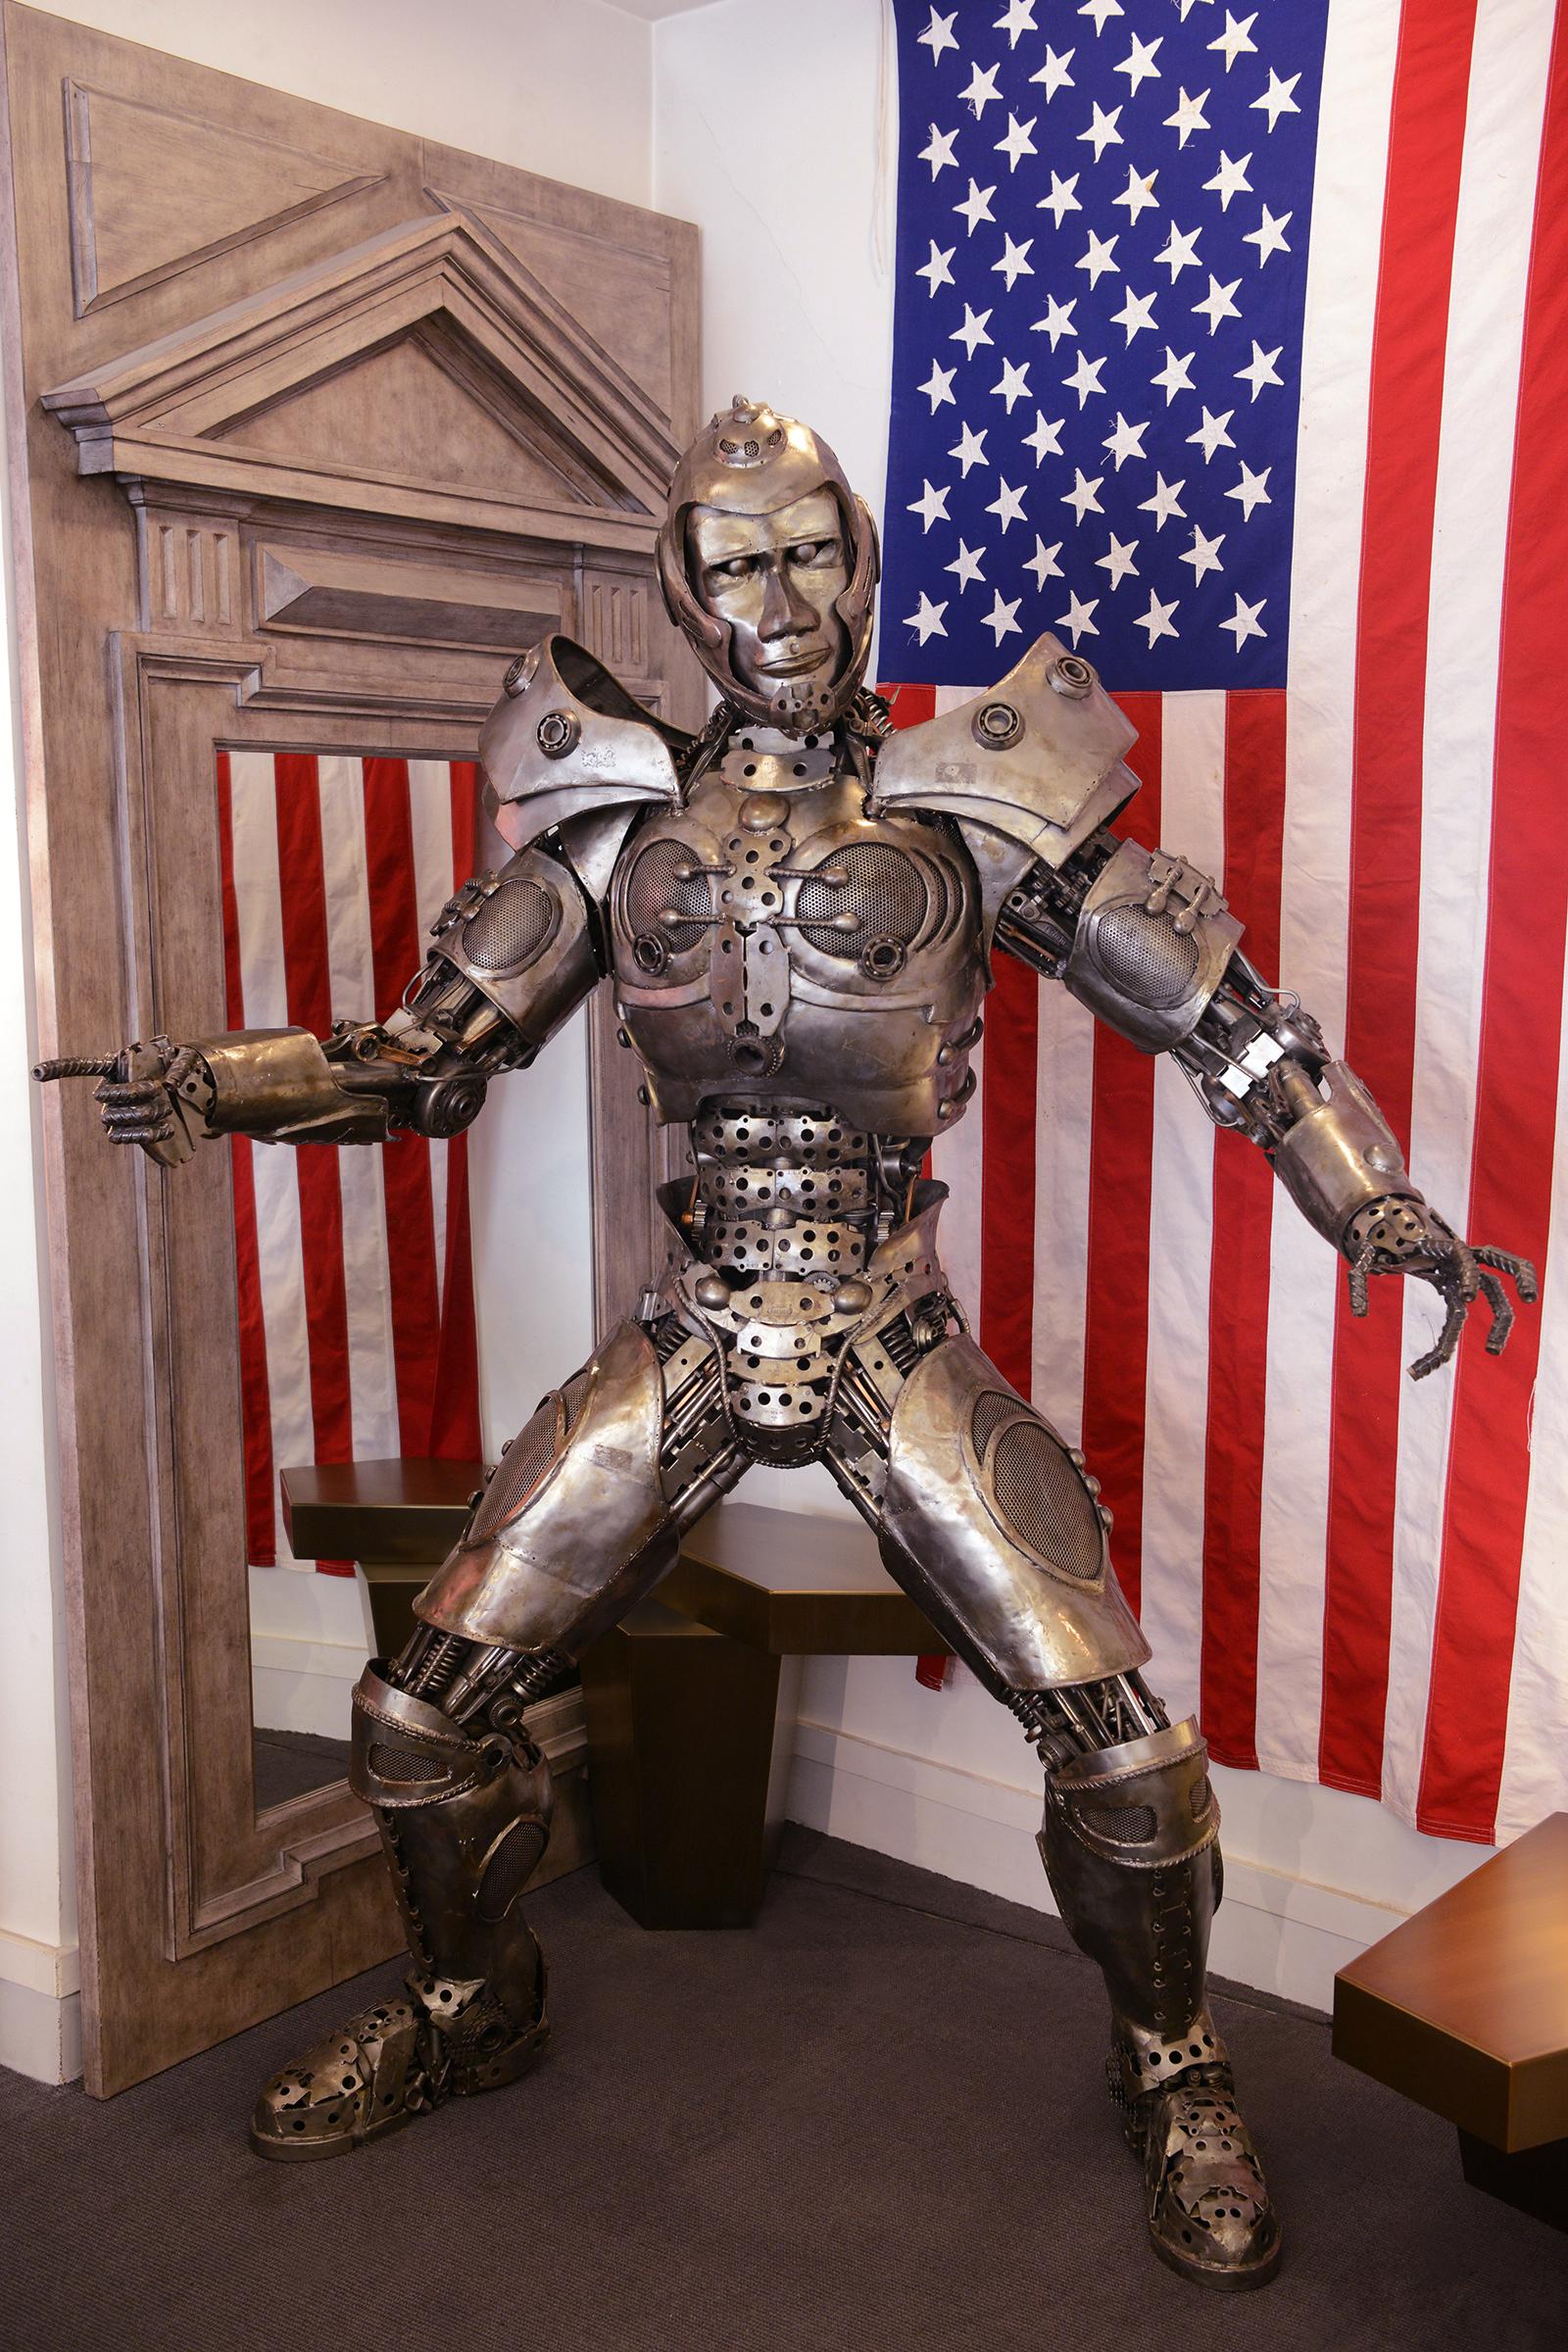 Sculpture Mr Boy Robot Warrior, 2004 Important steel 
sculpture from 2004 made up of an assembly of mechanical 
parts from various welded automobile salvage. Representing a 
robot warrior made raw hand-crafted, welded polished mechanical 
parts.